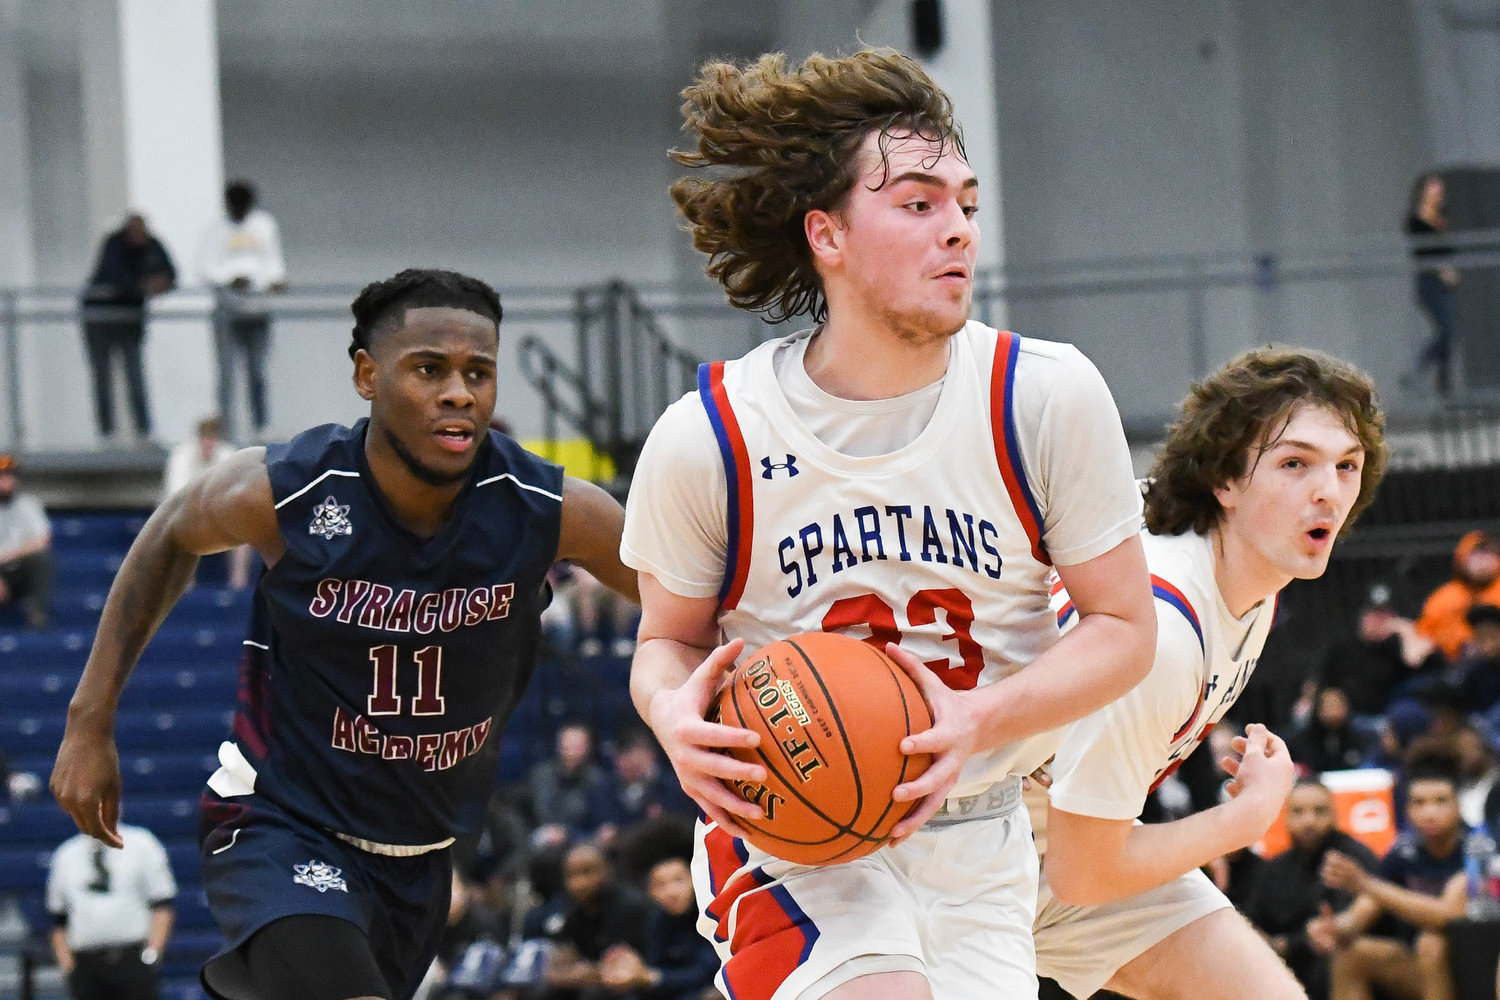 Zach Philipkoski, center, was a standout last season for the New Hartford boys basketball team that went to the state Class A championship game.